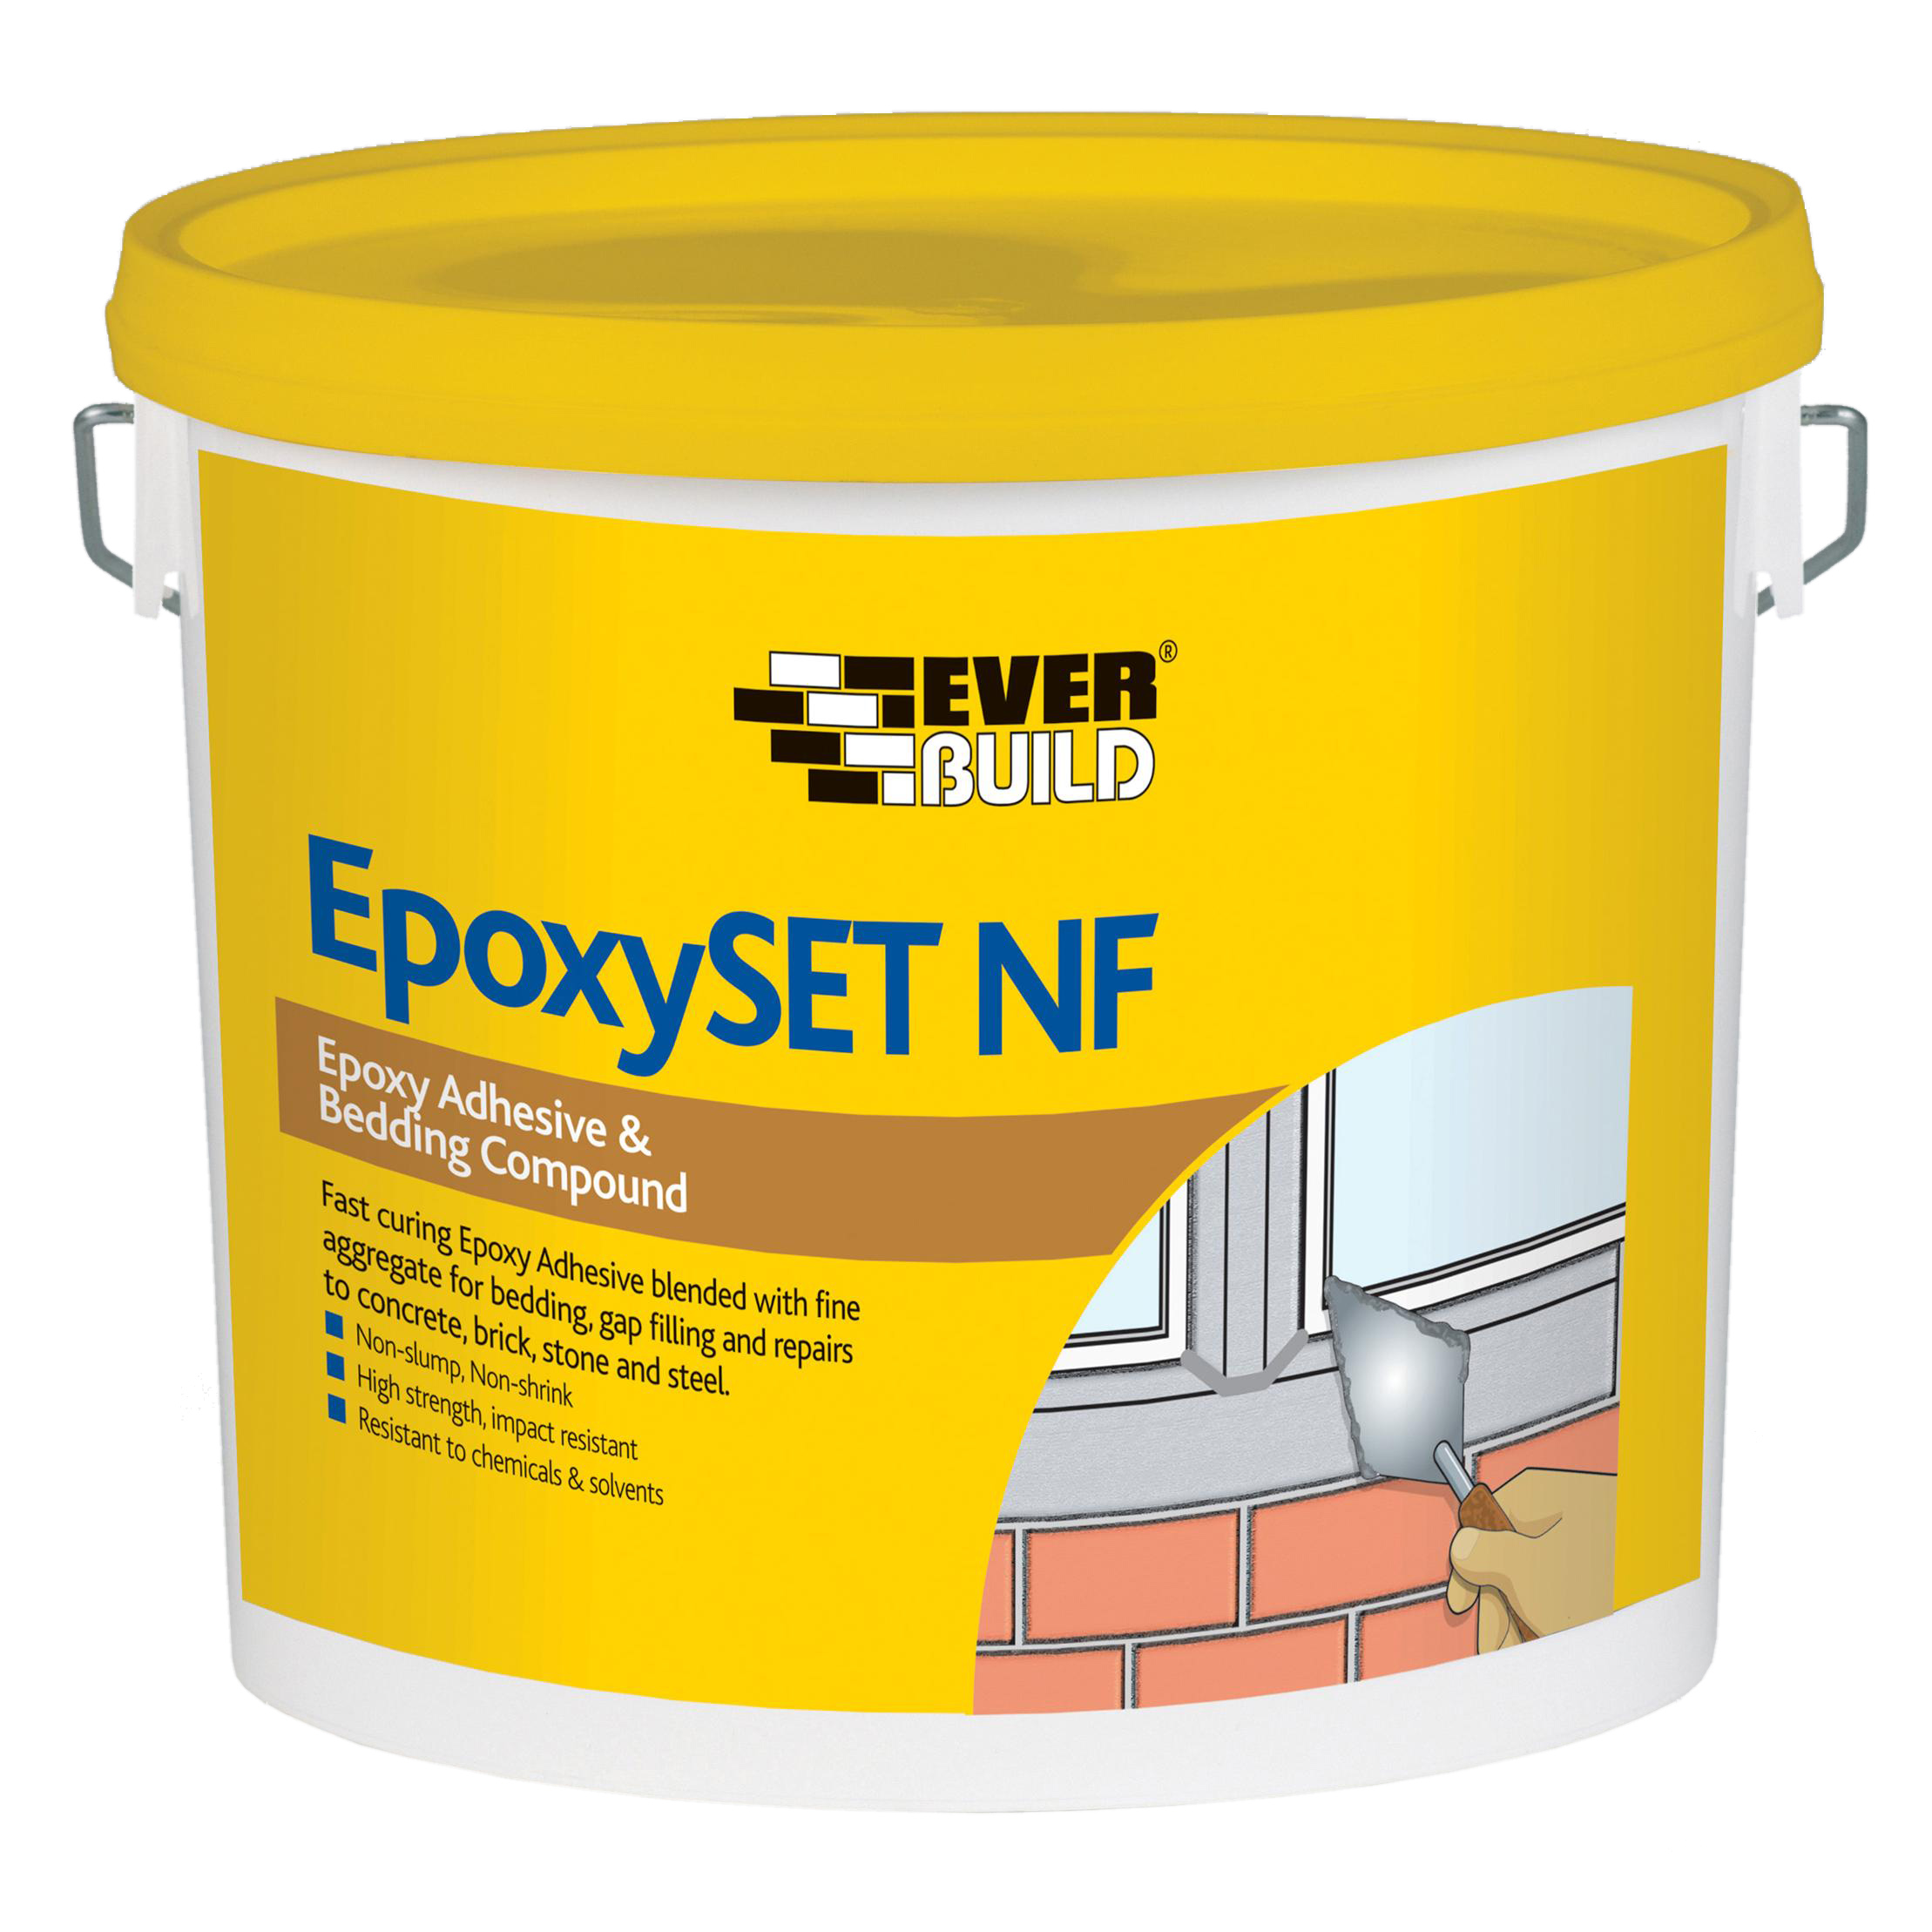 Epoxyset NF Grey 3kg ( Formerly known as Febox NF )